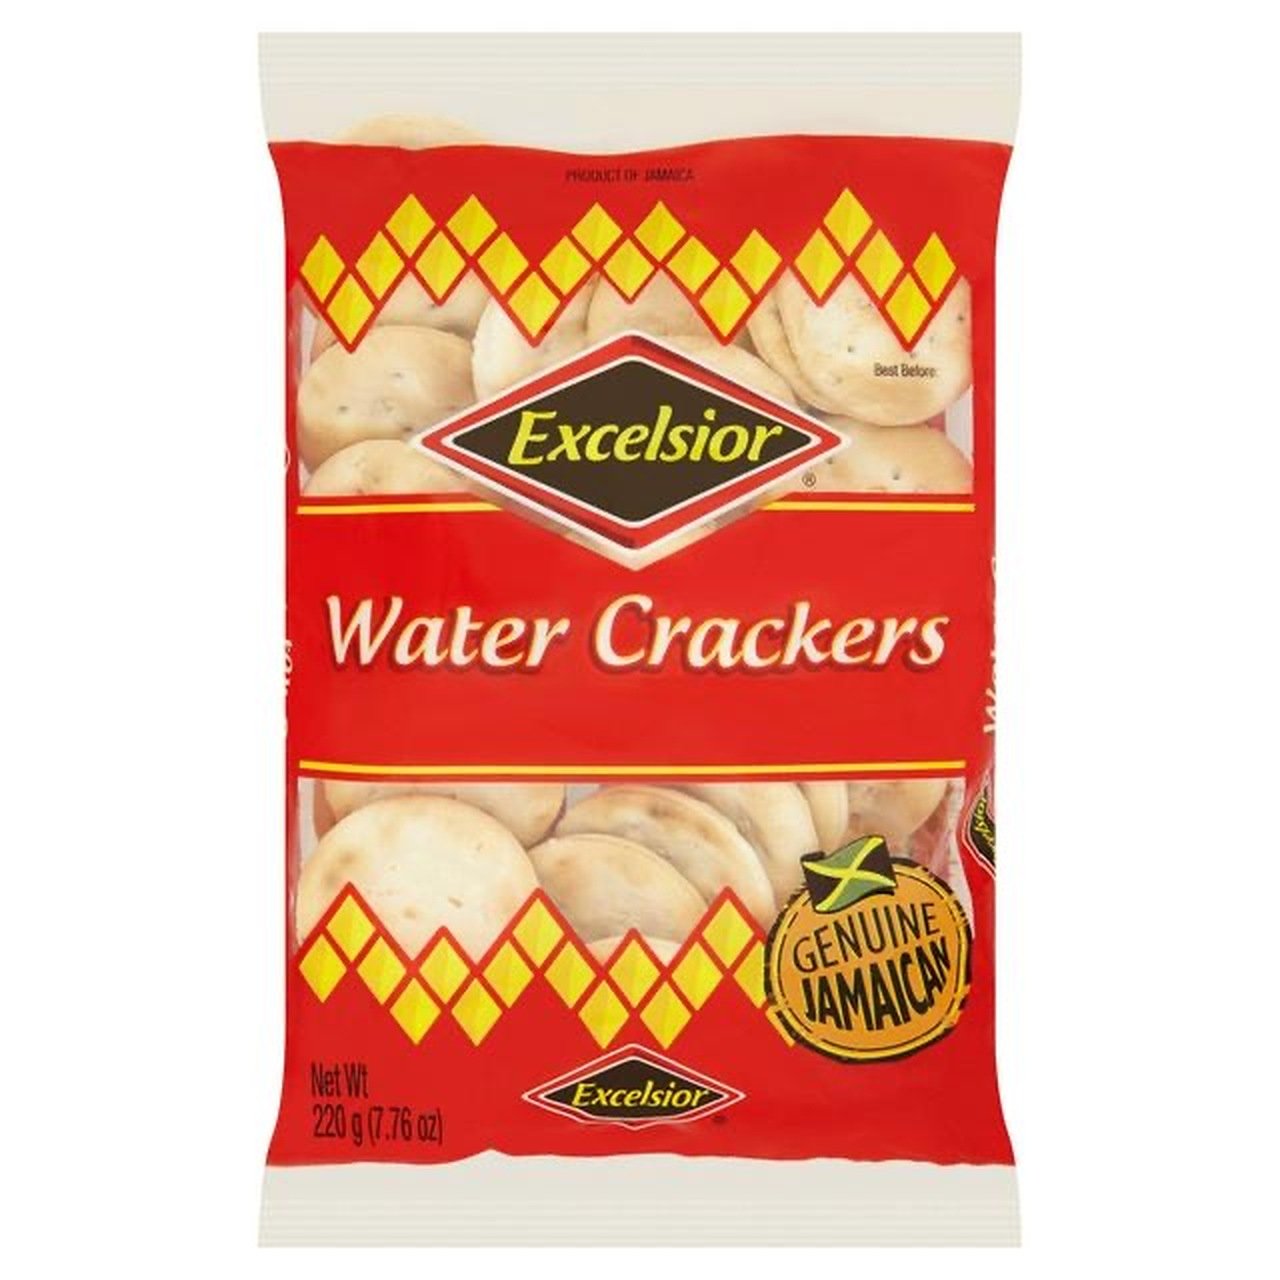 Excelsior Water Crackers 300g Box of 6